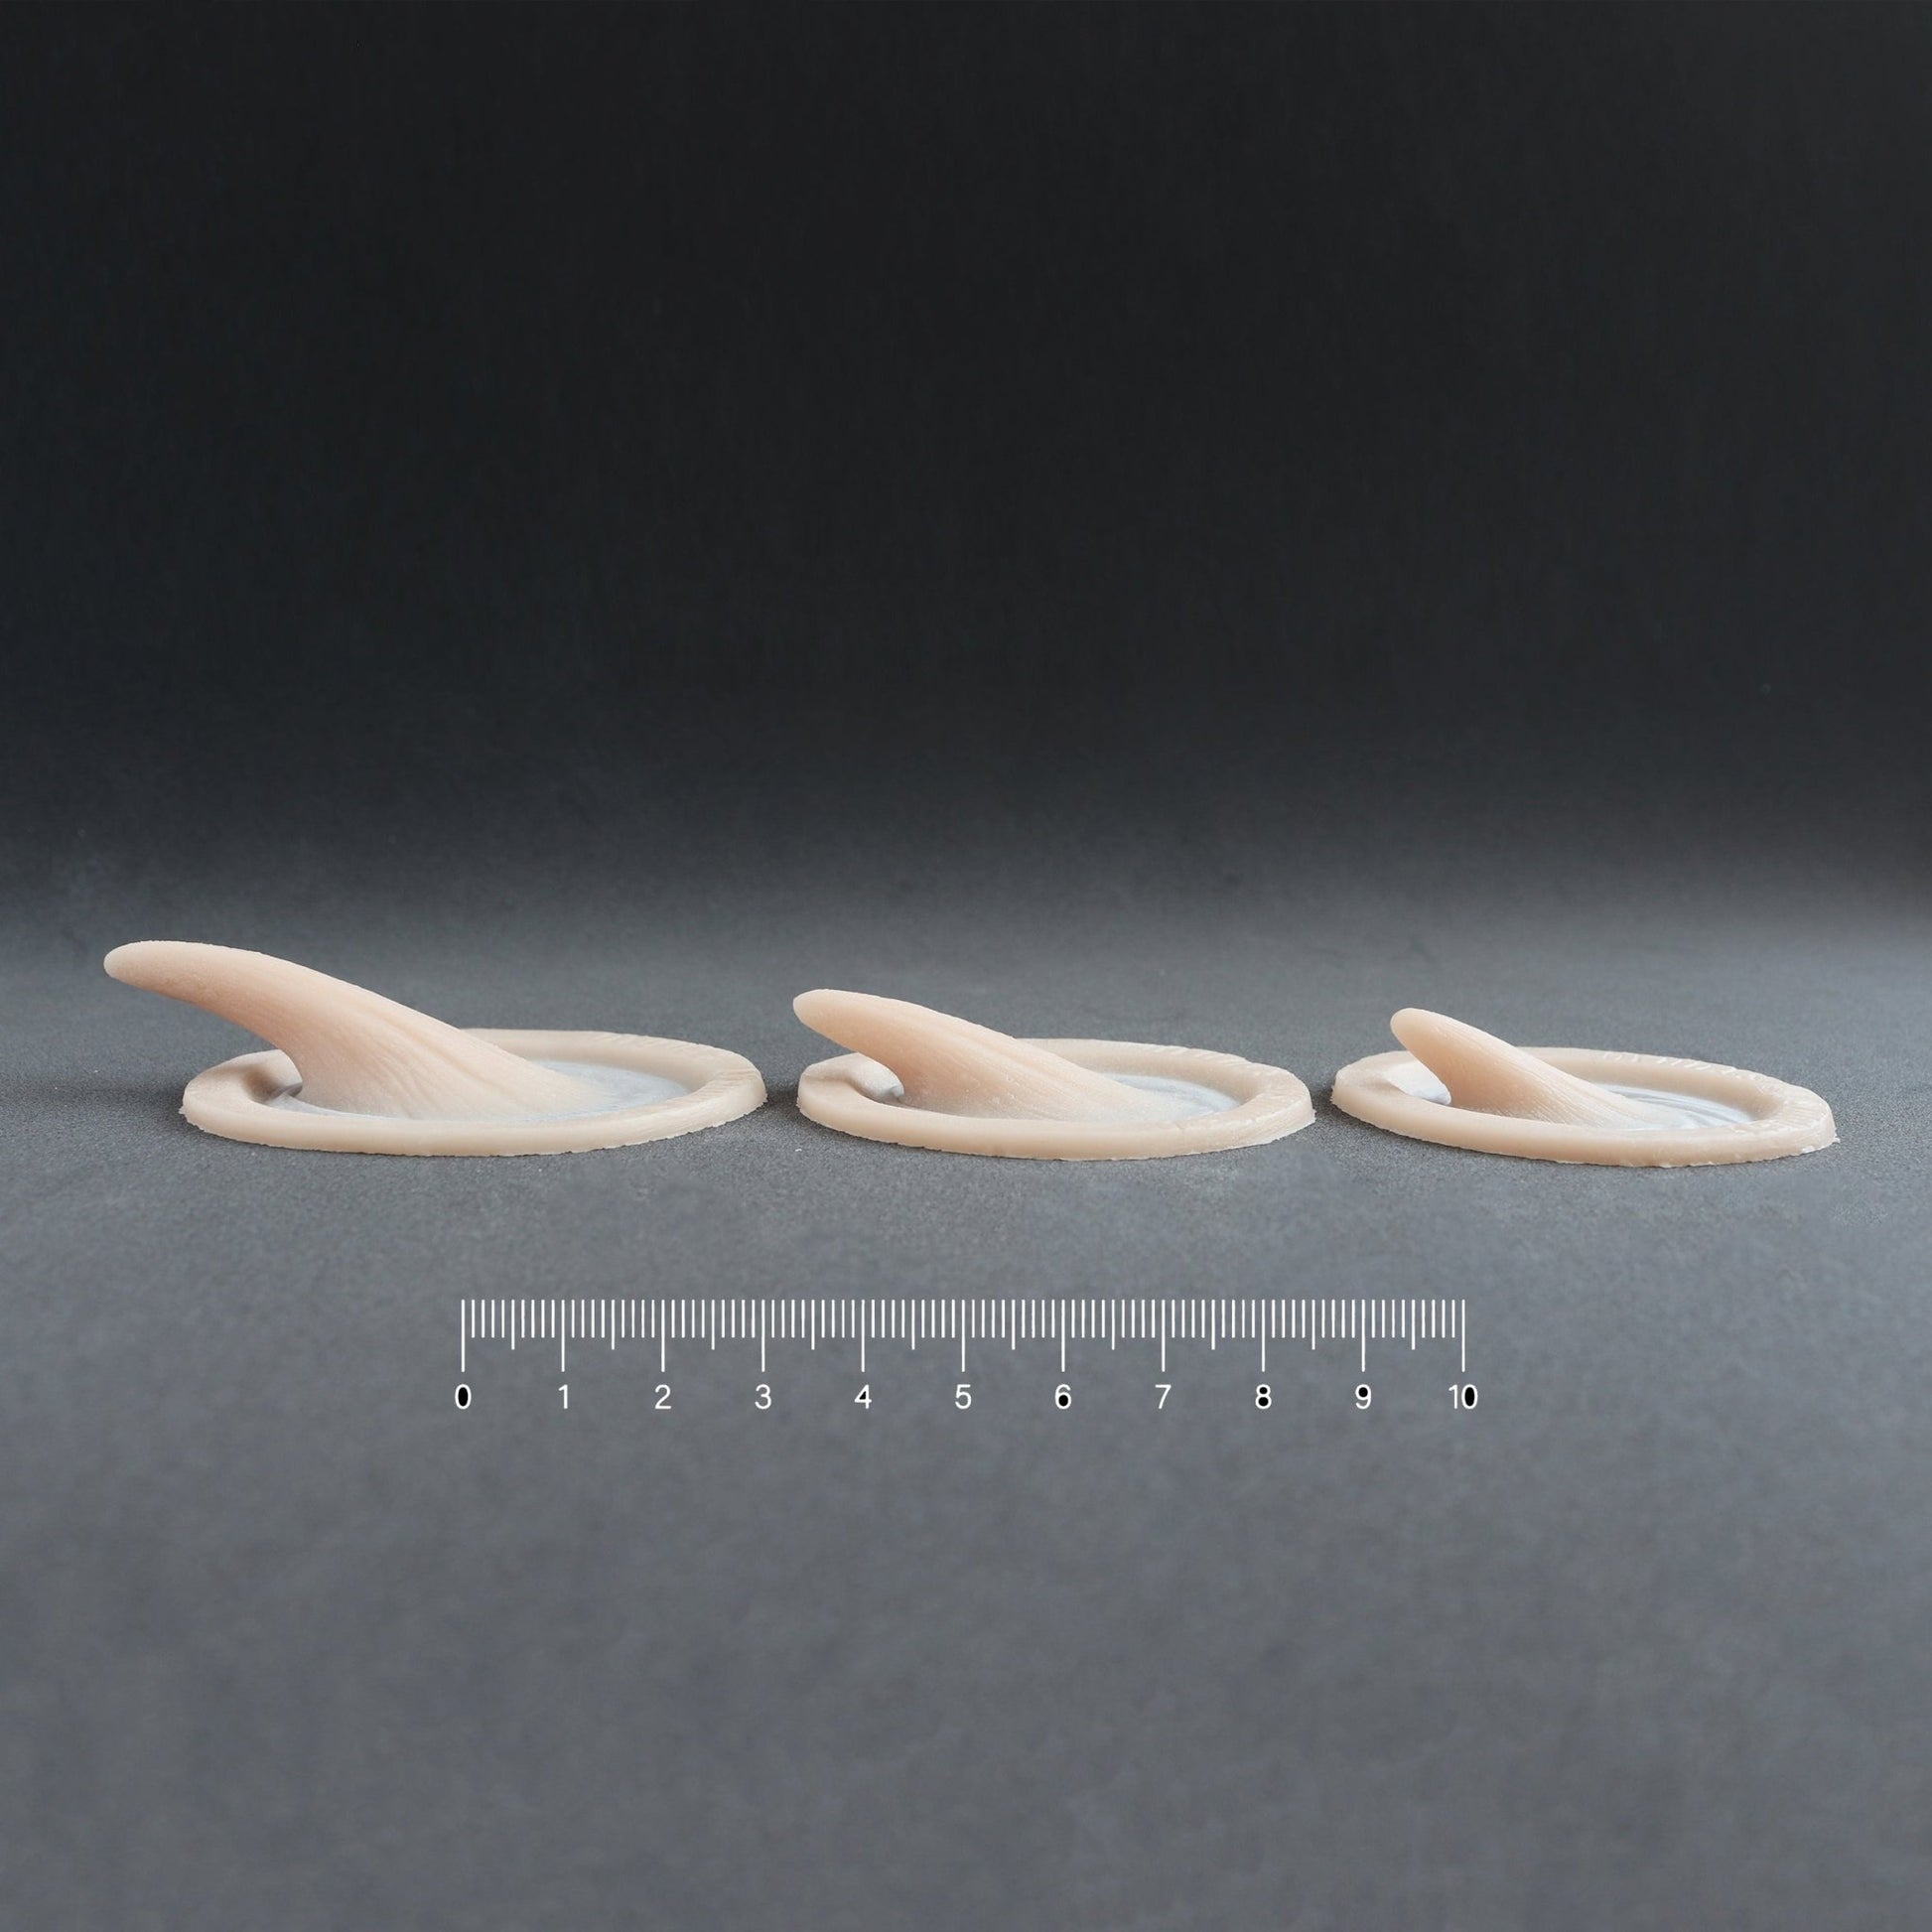 Small Vertical Horns (Pair) - Silicone makeup prosthetic in vanilla shade on a black surface with a ruler